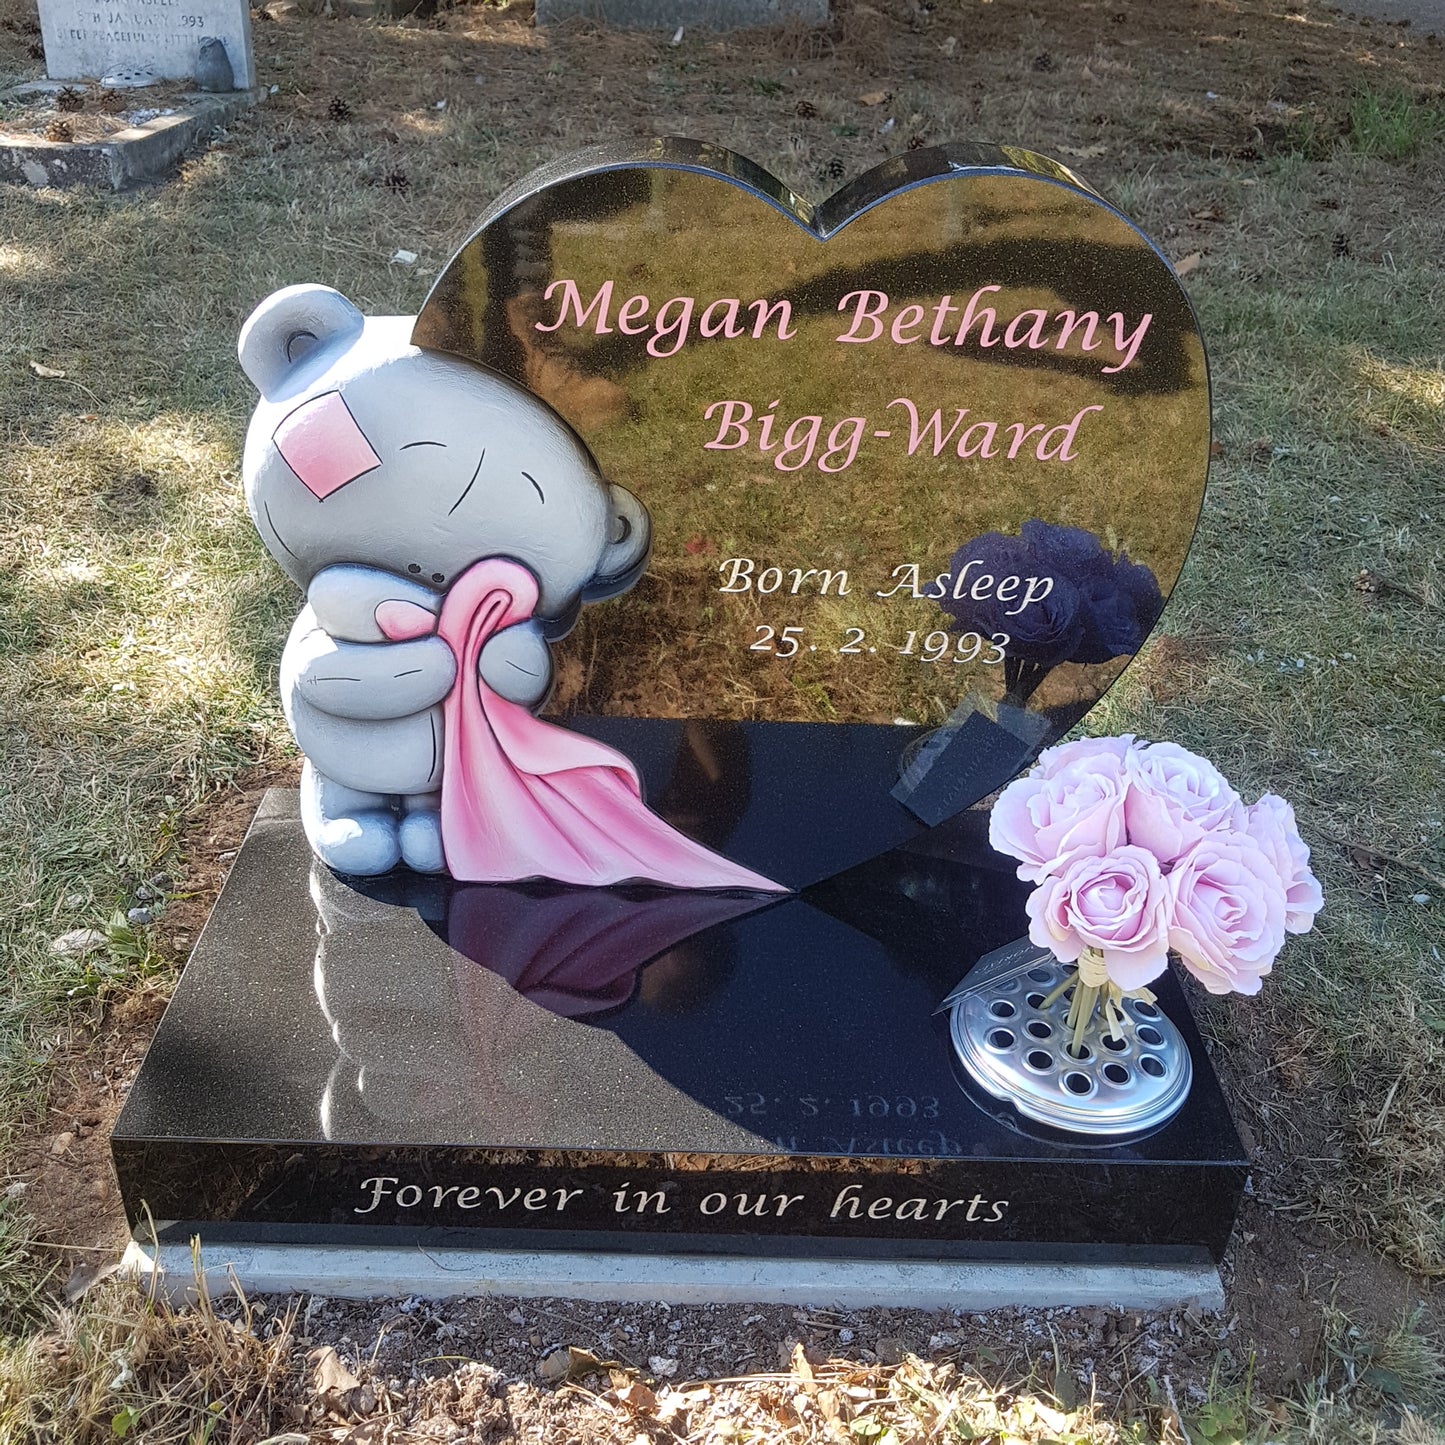 Carved standing teddy bear memorial with curved base to match